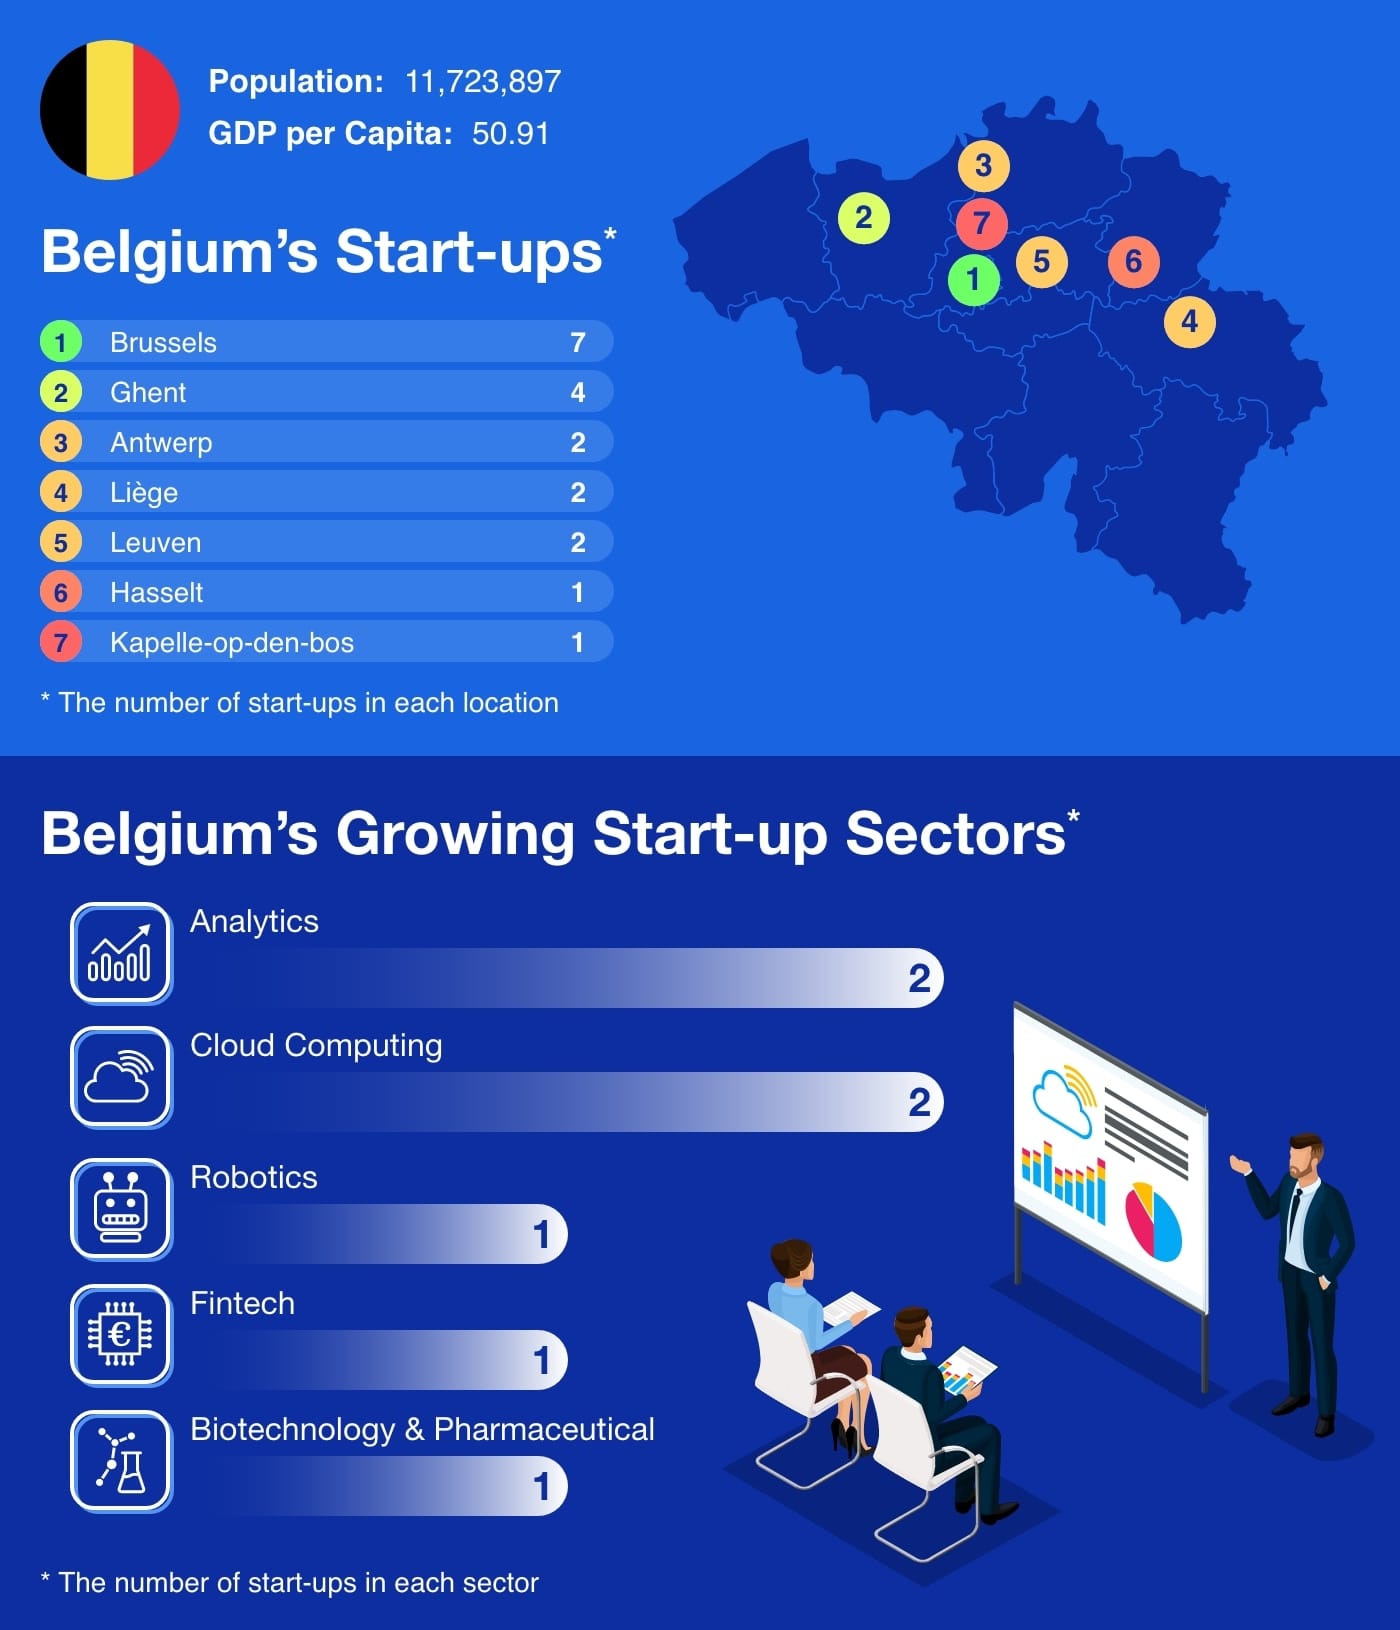 Infographic showing the number of Belgium's start-ups by location and sector